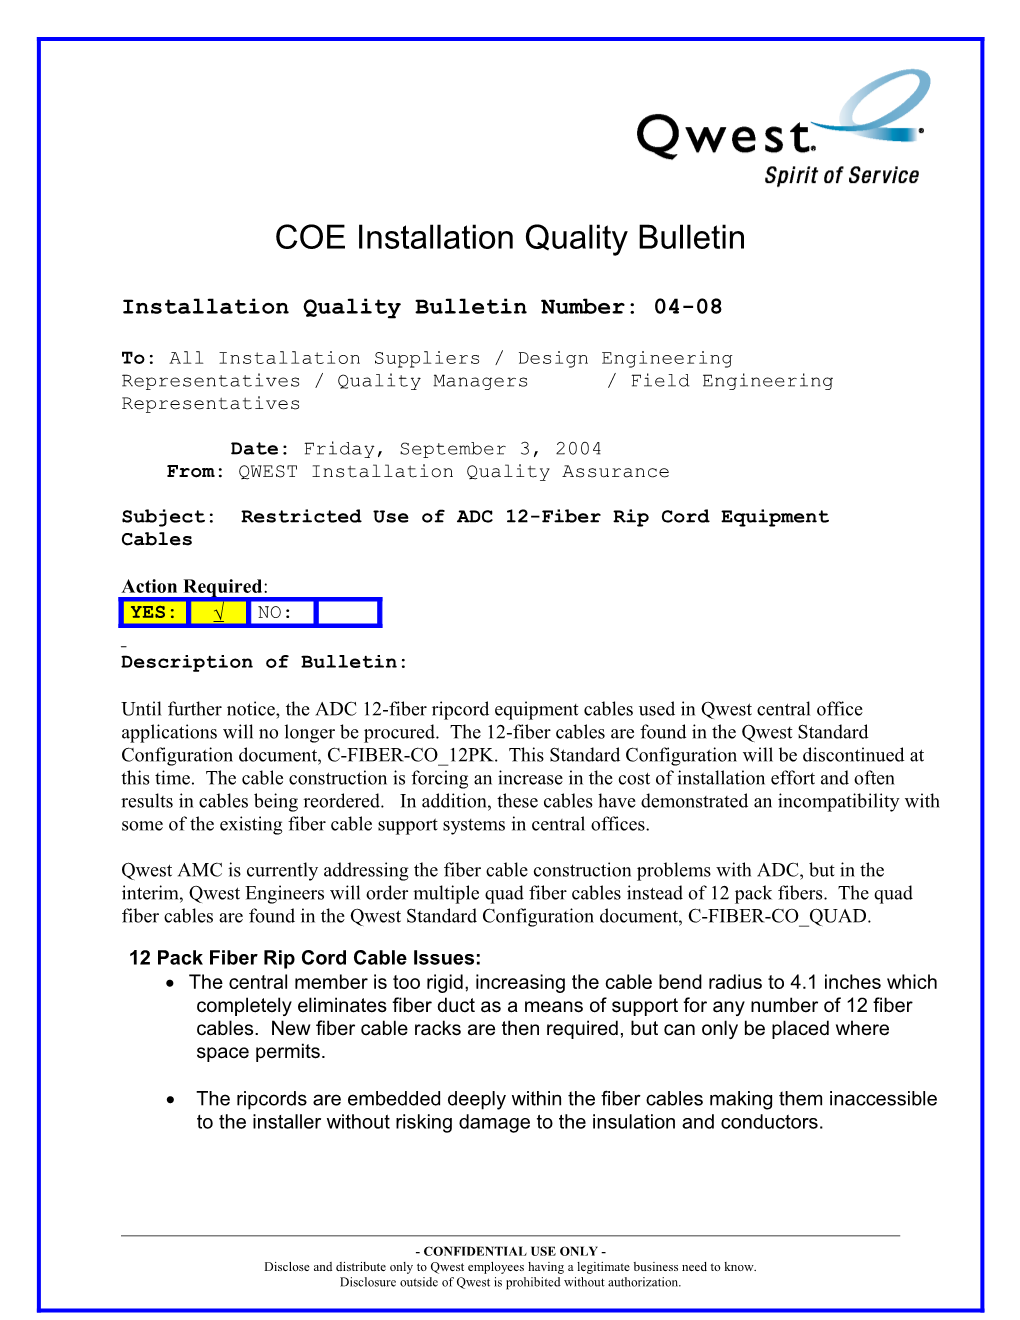 Installation Quality Bulletin Number: 04-08